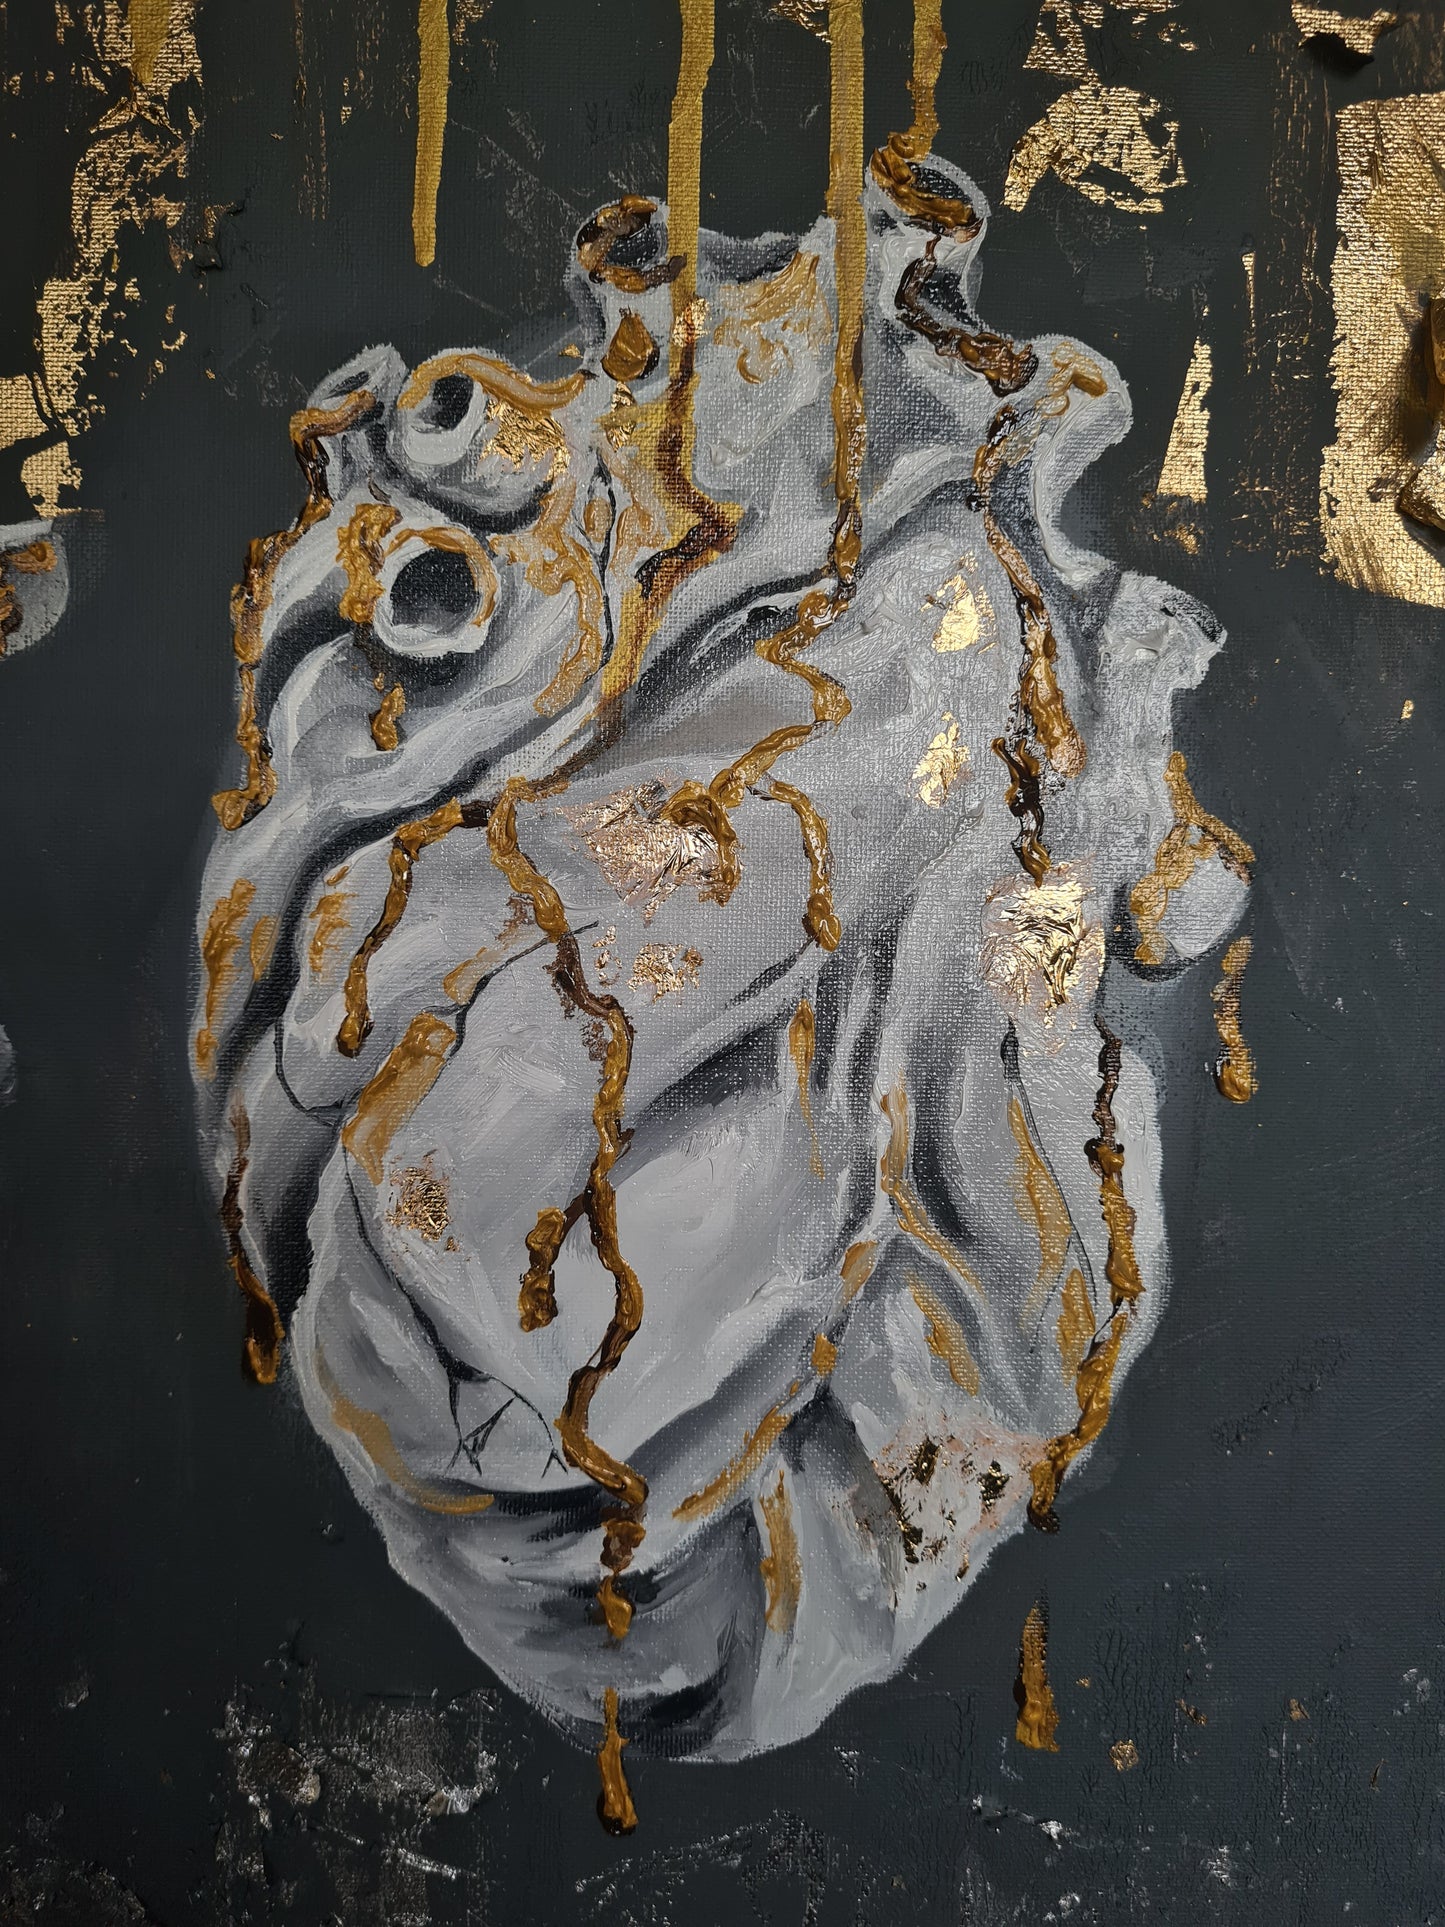 Original painting on canvas: "Heart of Stone" 102x76cm